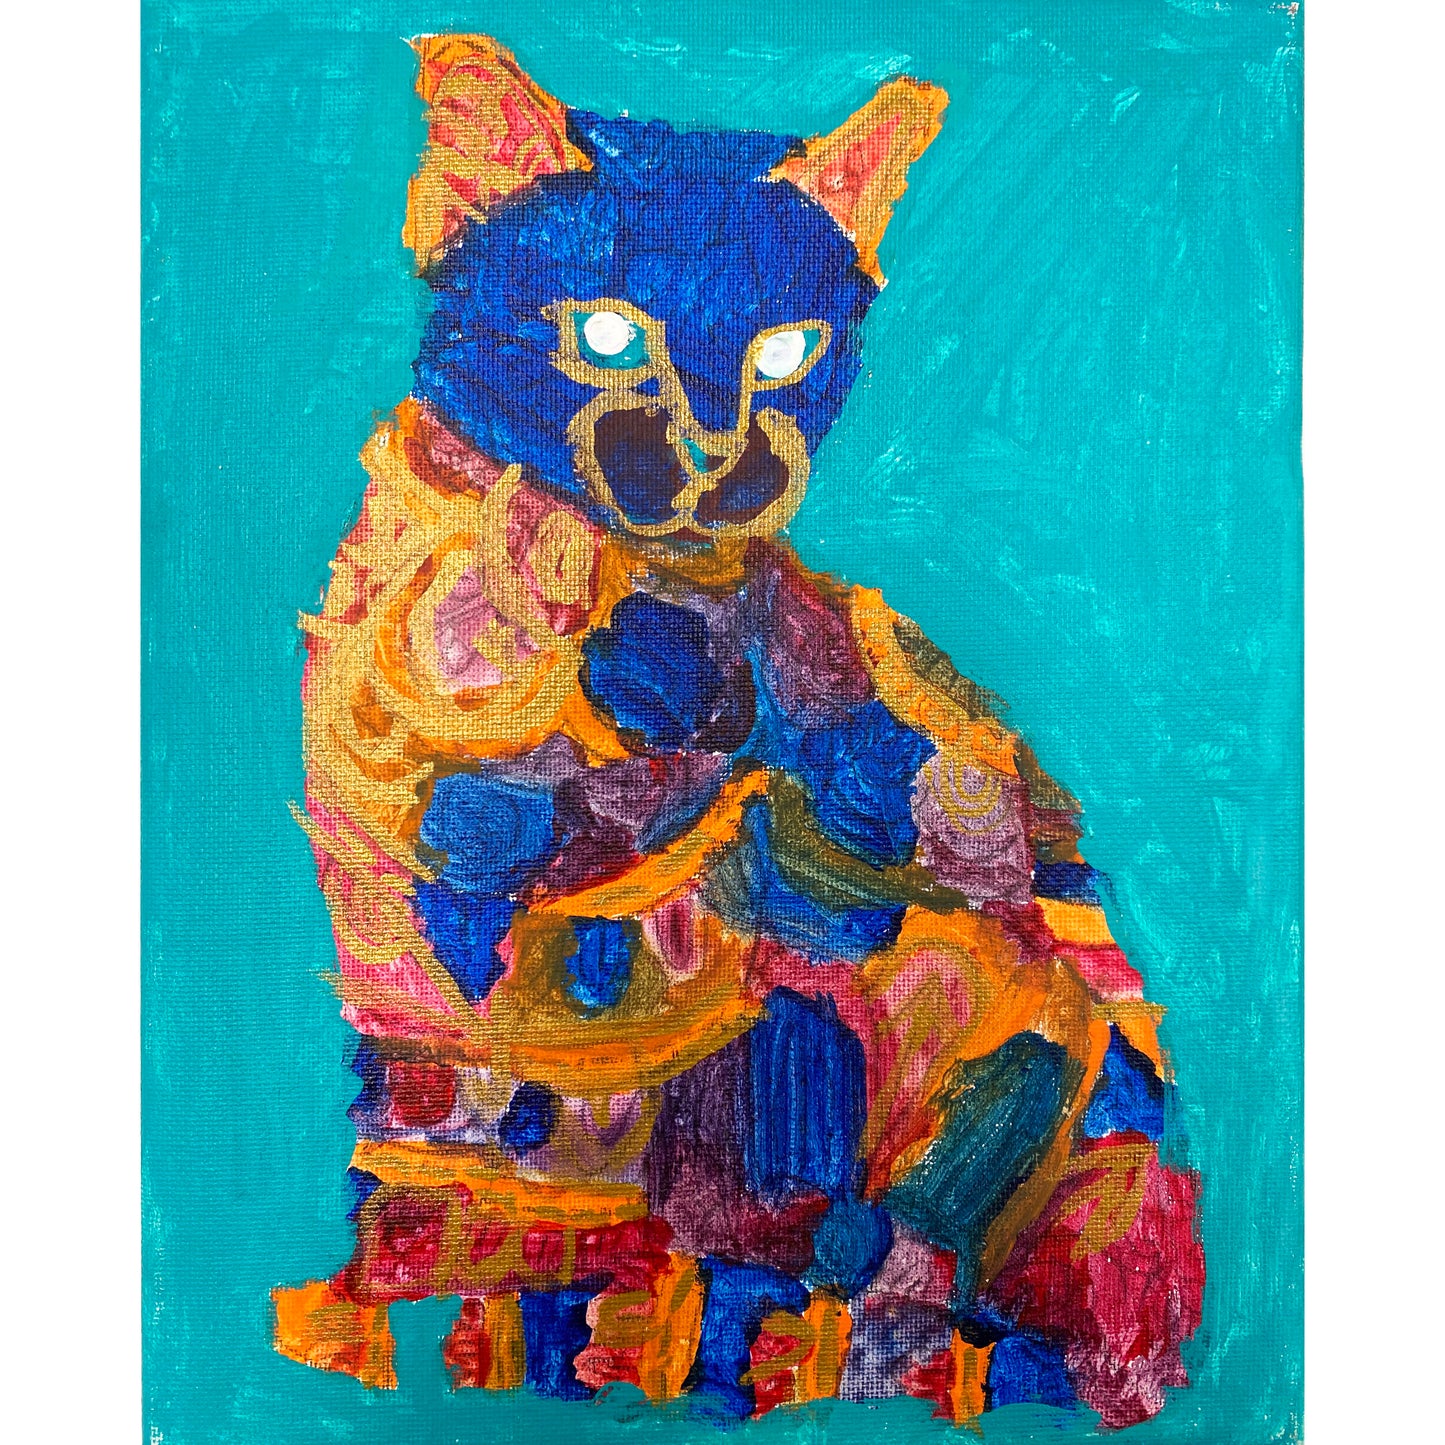 Acrylic Paint on Stretched Canvas, 10 x 8 Original Fine Art, Cat made by Karissa Archer